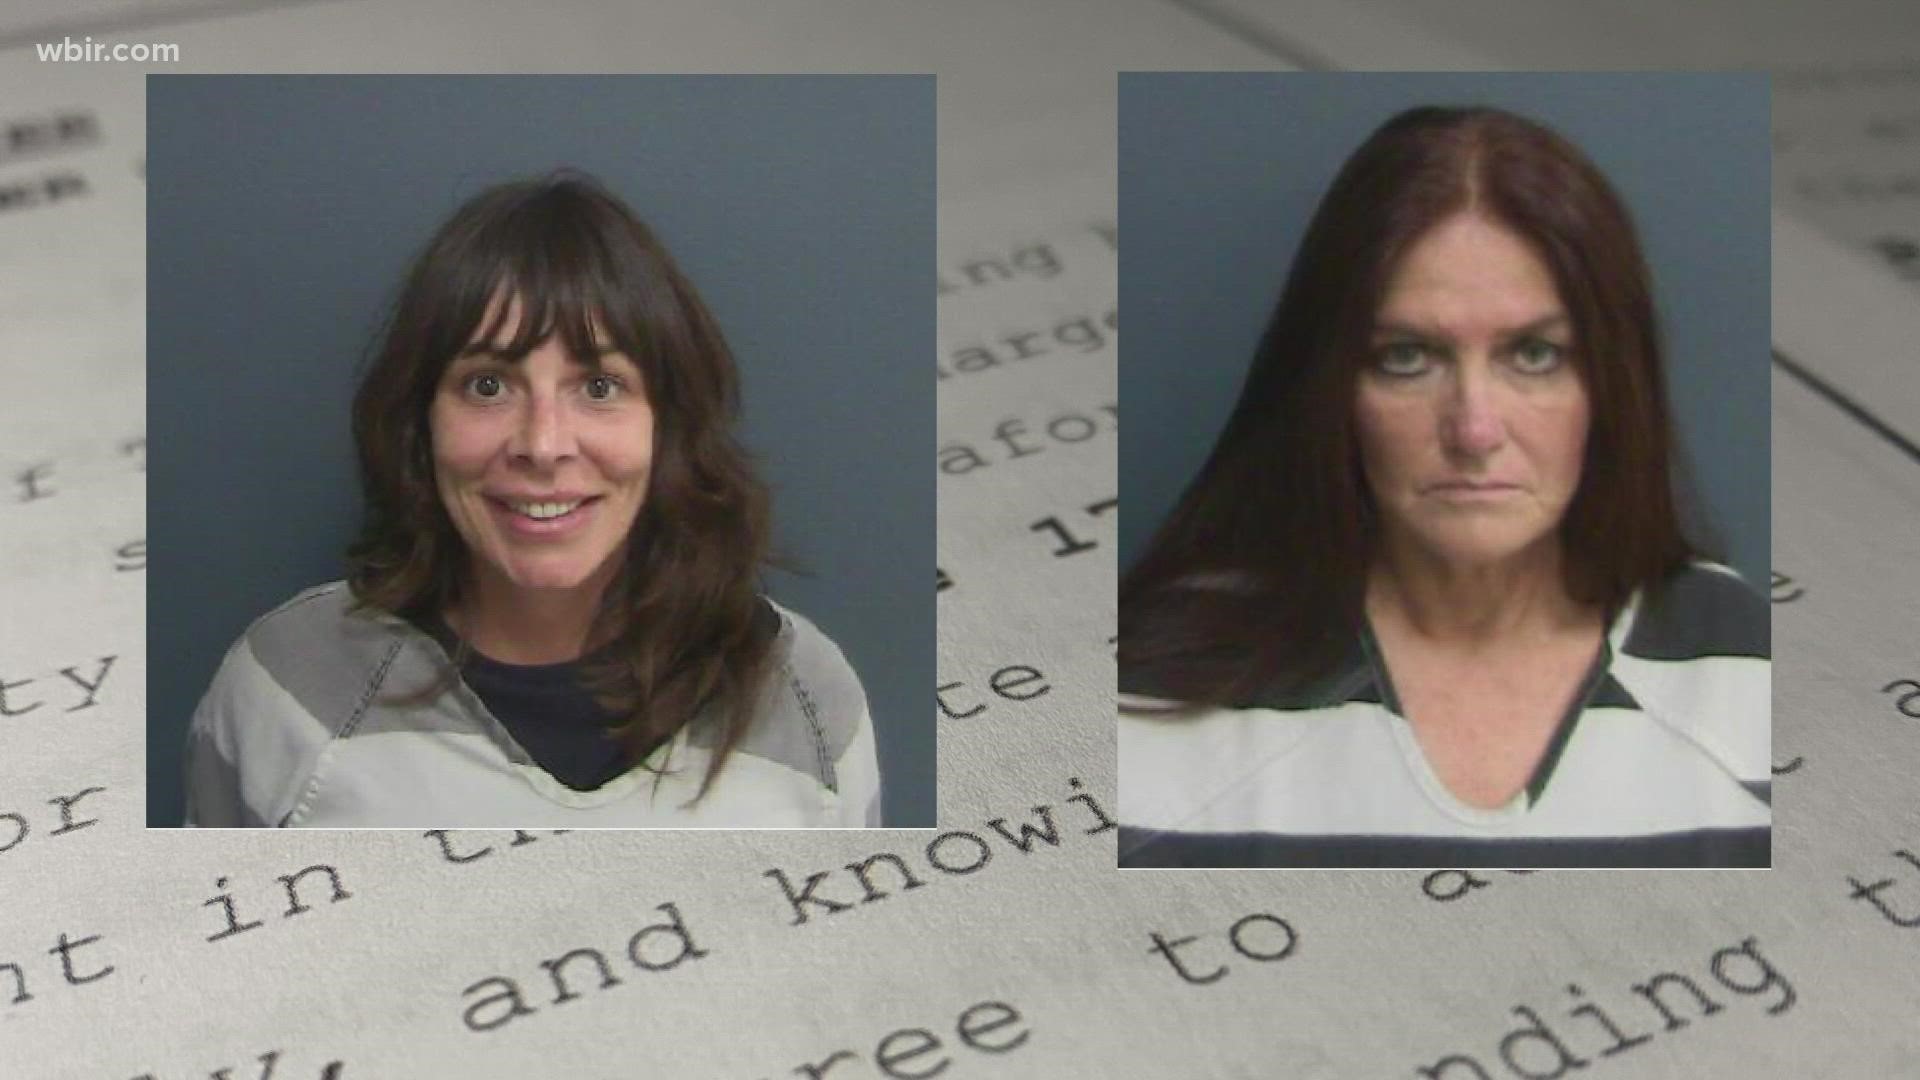 The 2 women are facing charges in state and federal court for obstructing interstate commerce, part of a wider investigation into cocaine trafficking in the county.